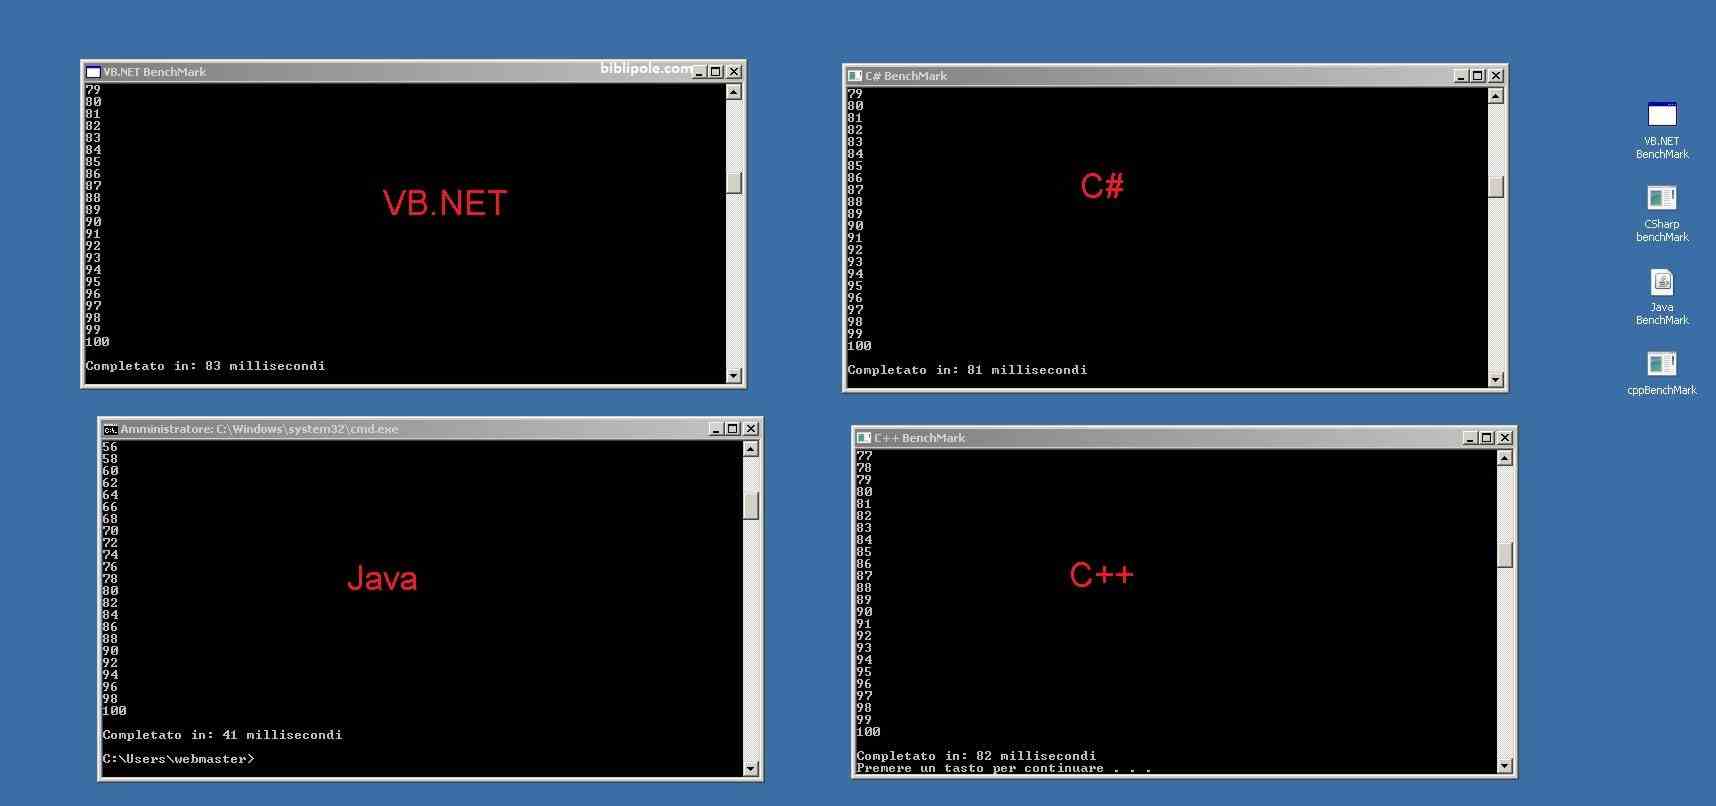 There are three different screen vb.net c# java and c++